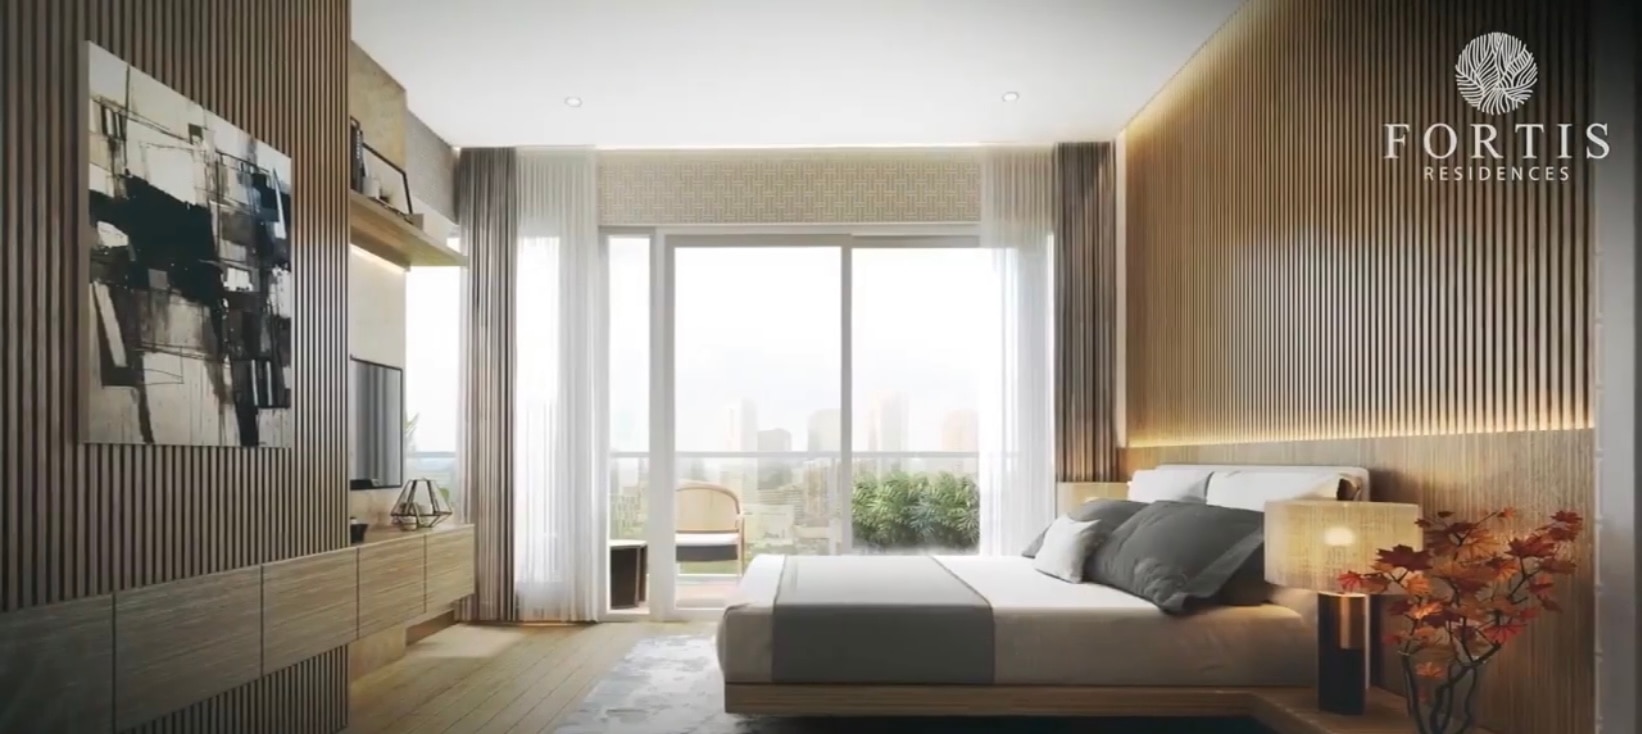 Architect's rendition of a stylish bedroom at Fortis Residences. Photo source: DMCI